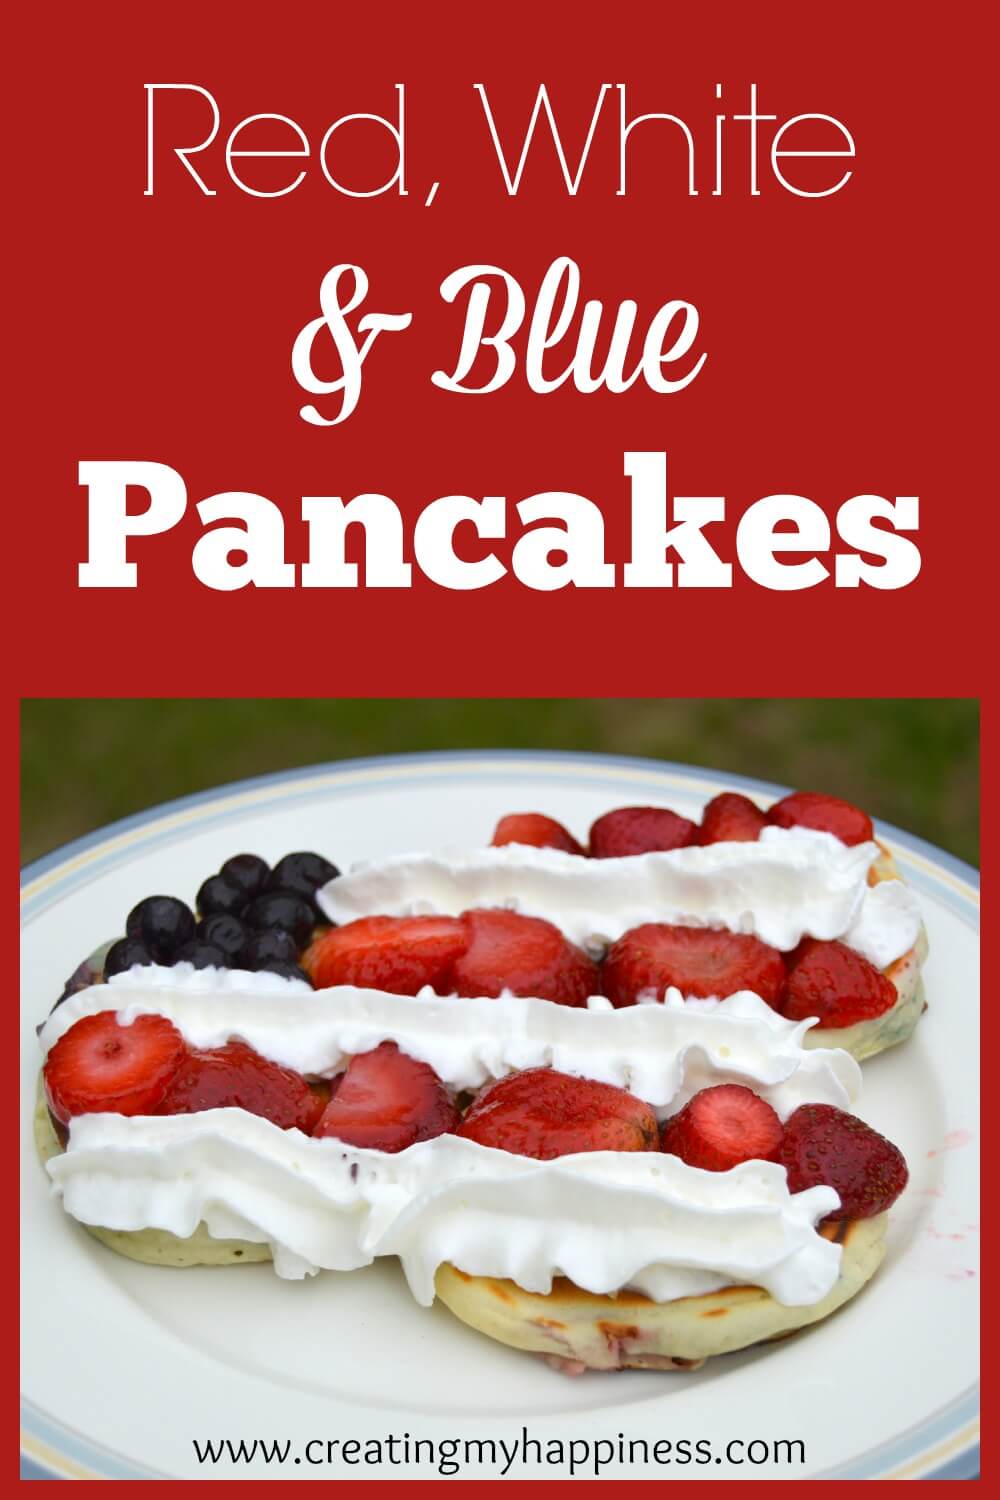 Perfect for Memorial Day, the 4th of July, or just any plain old day. These pancakes are thick, fluffy and packed with berry goodness!